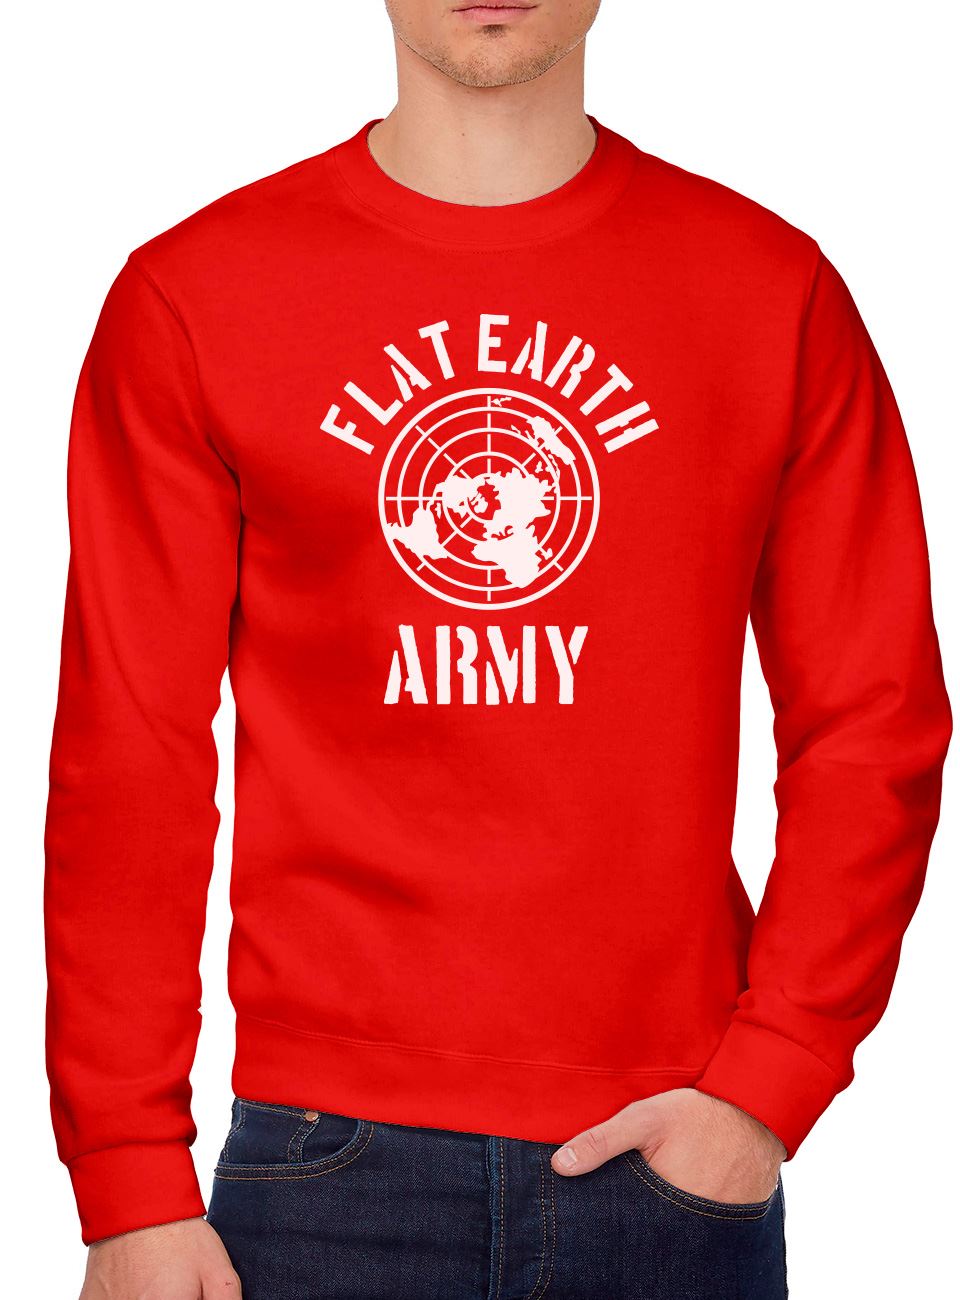 Flat Earth Army Flat-earther Theory - Youth & Mens Sweatshirt